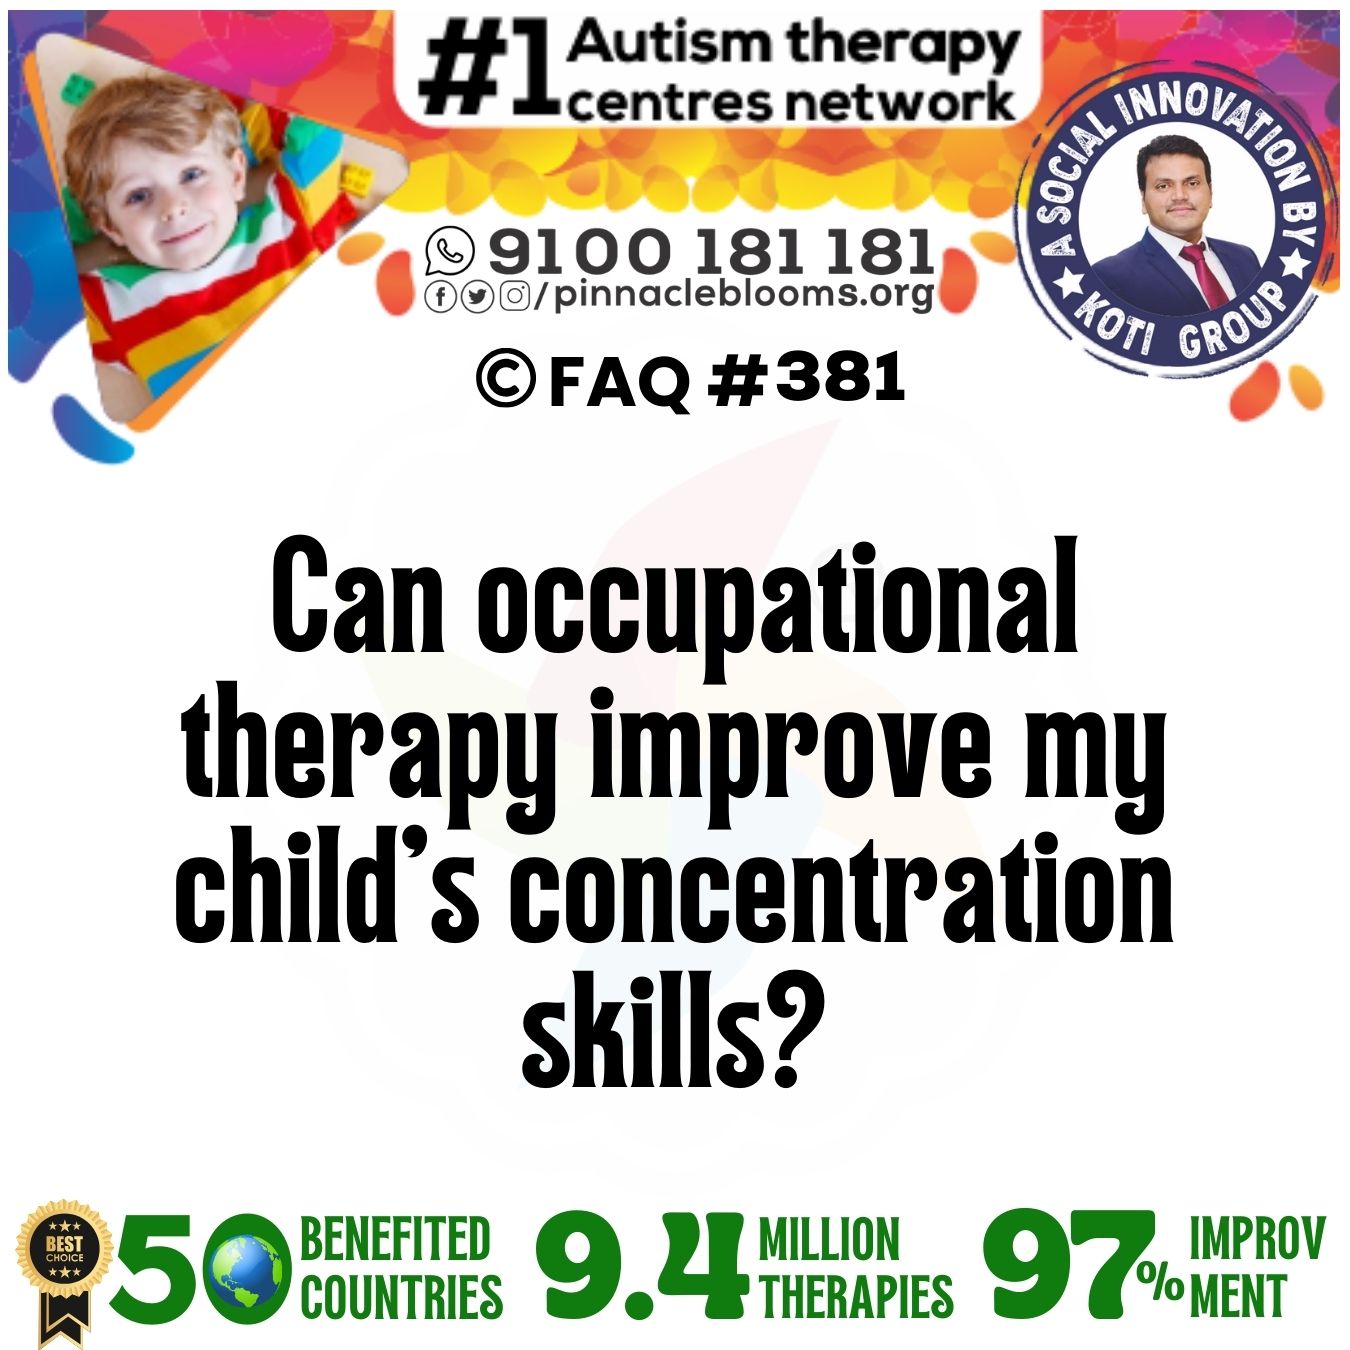 Can occupational therapy improve my child's concentration skills?